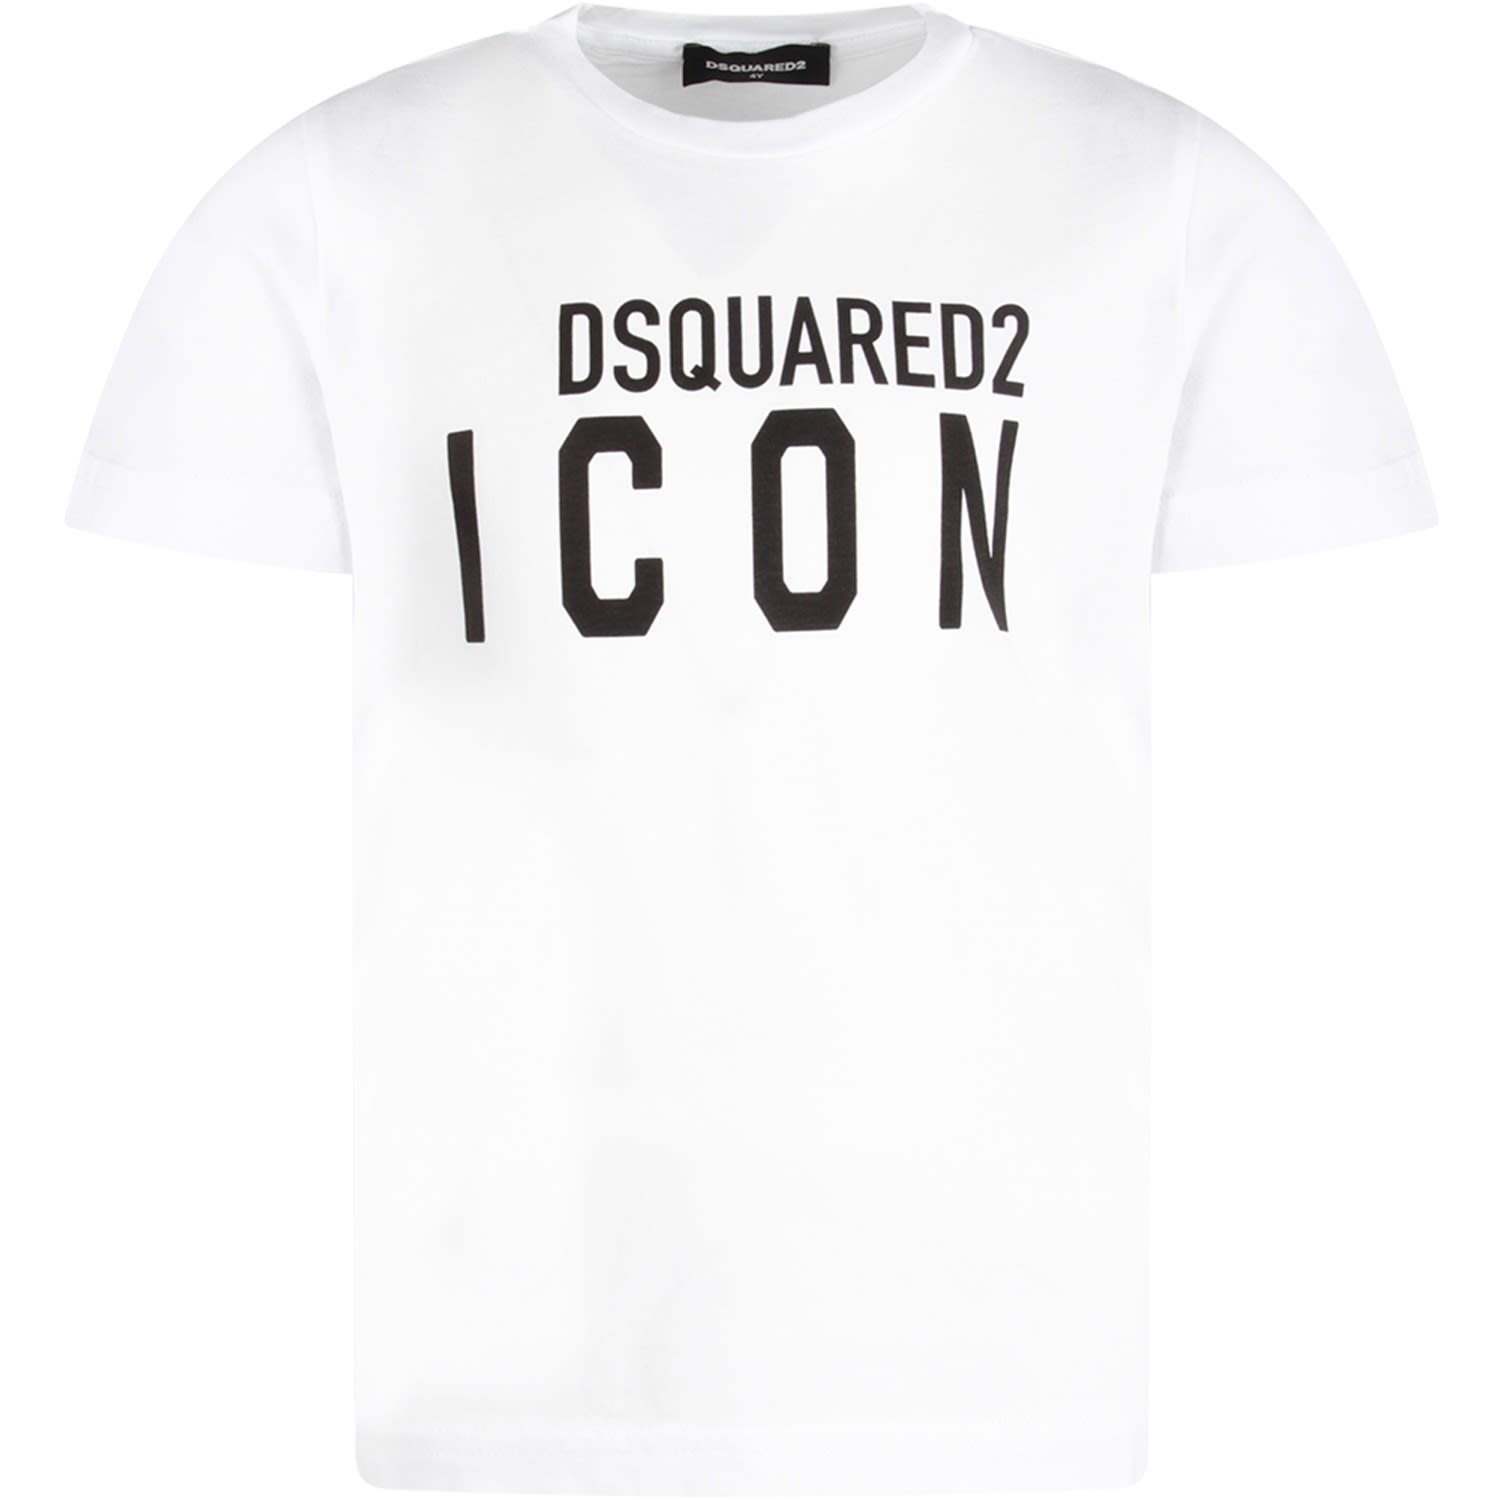 DSQUARED2 WHITE T-SHIRT FOR KIDS WITH BLACK LOGO AND WRITING,DQ04EV D00W5 DQ100